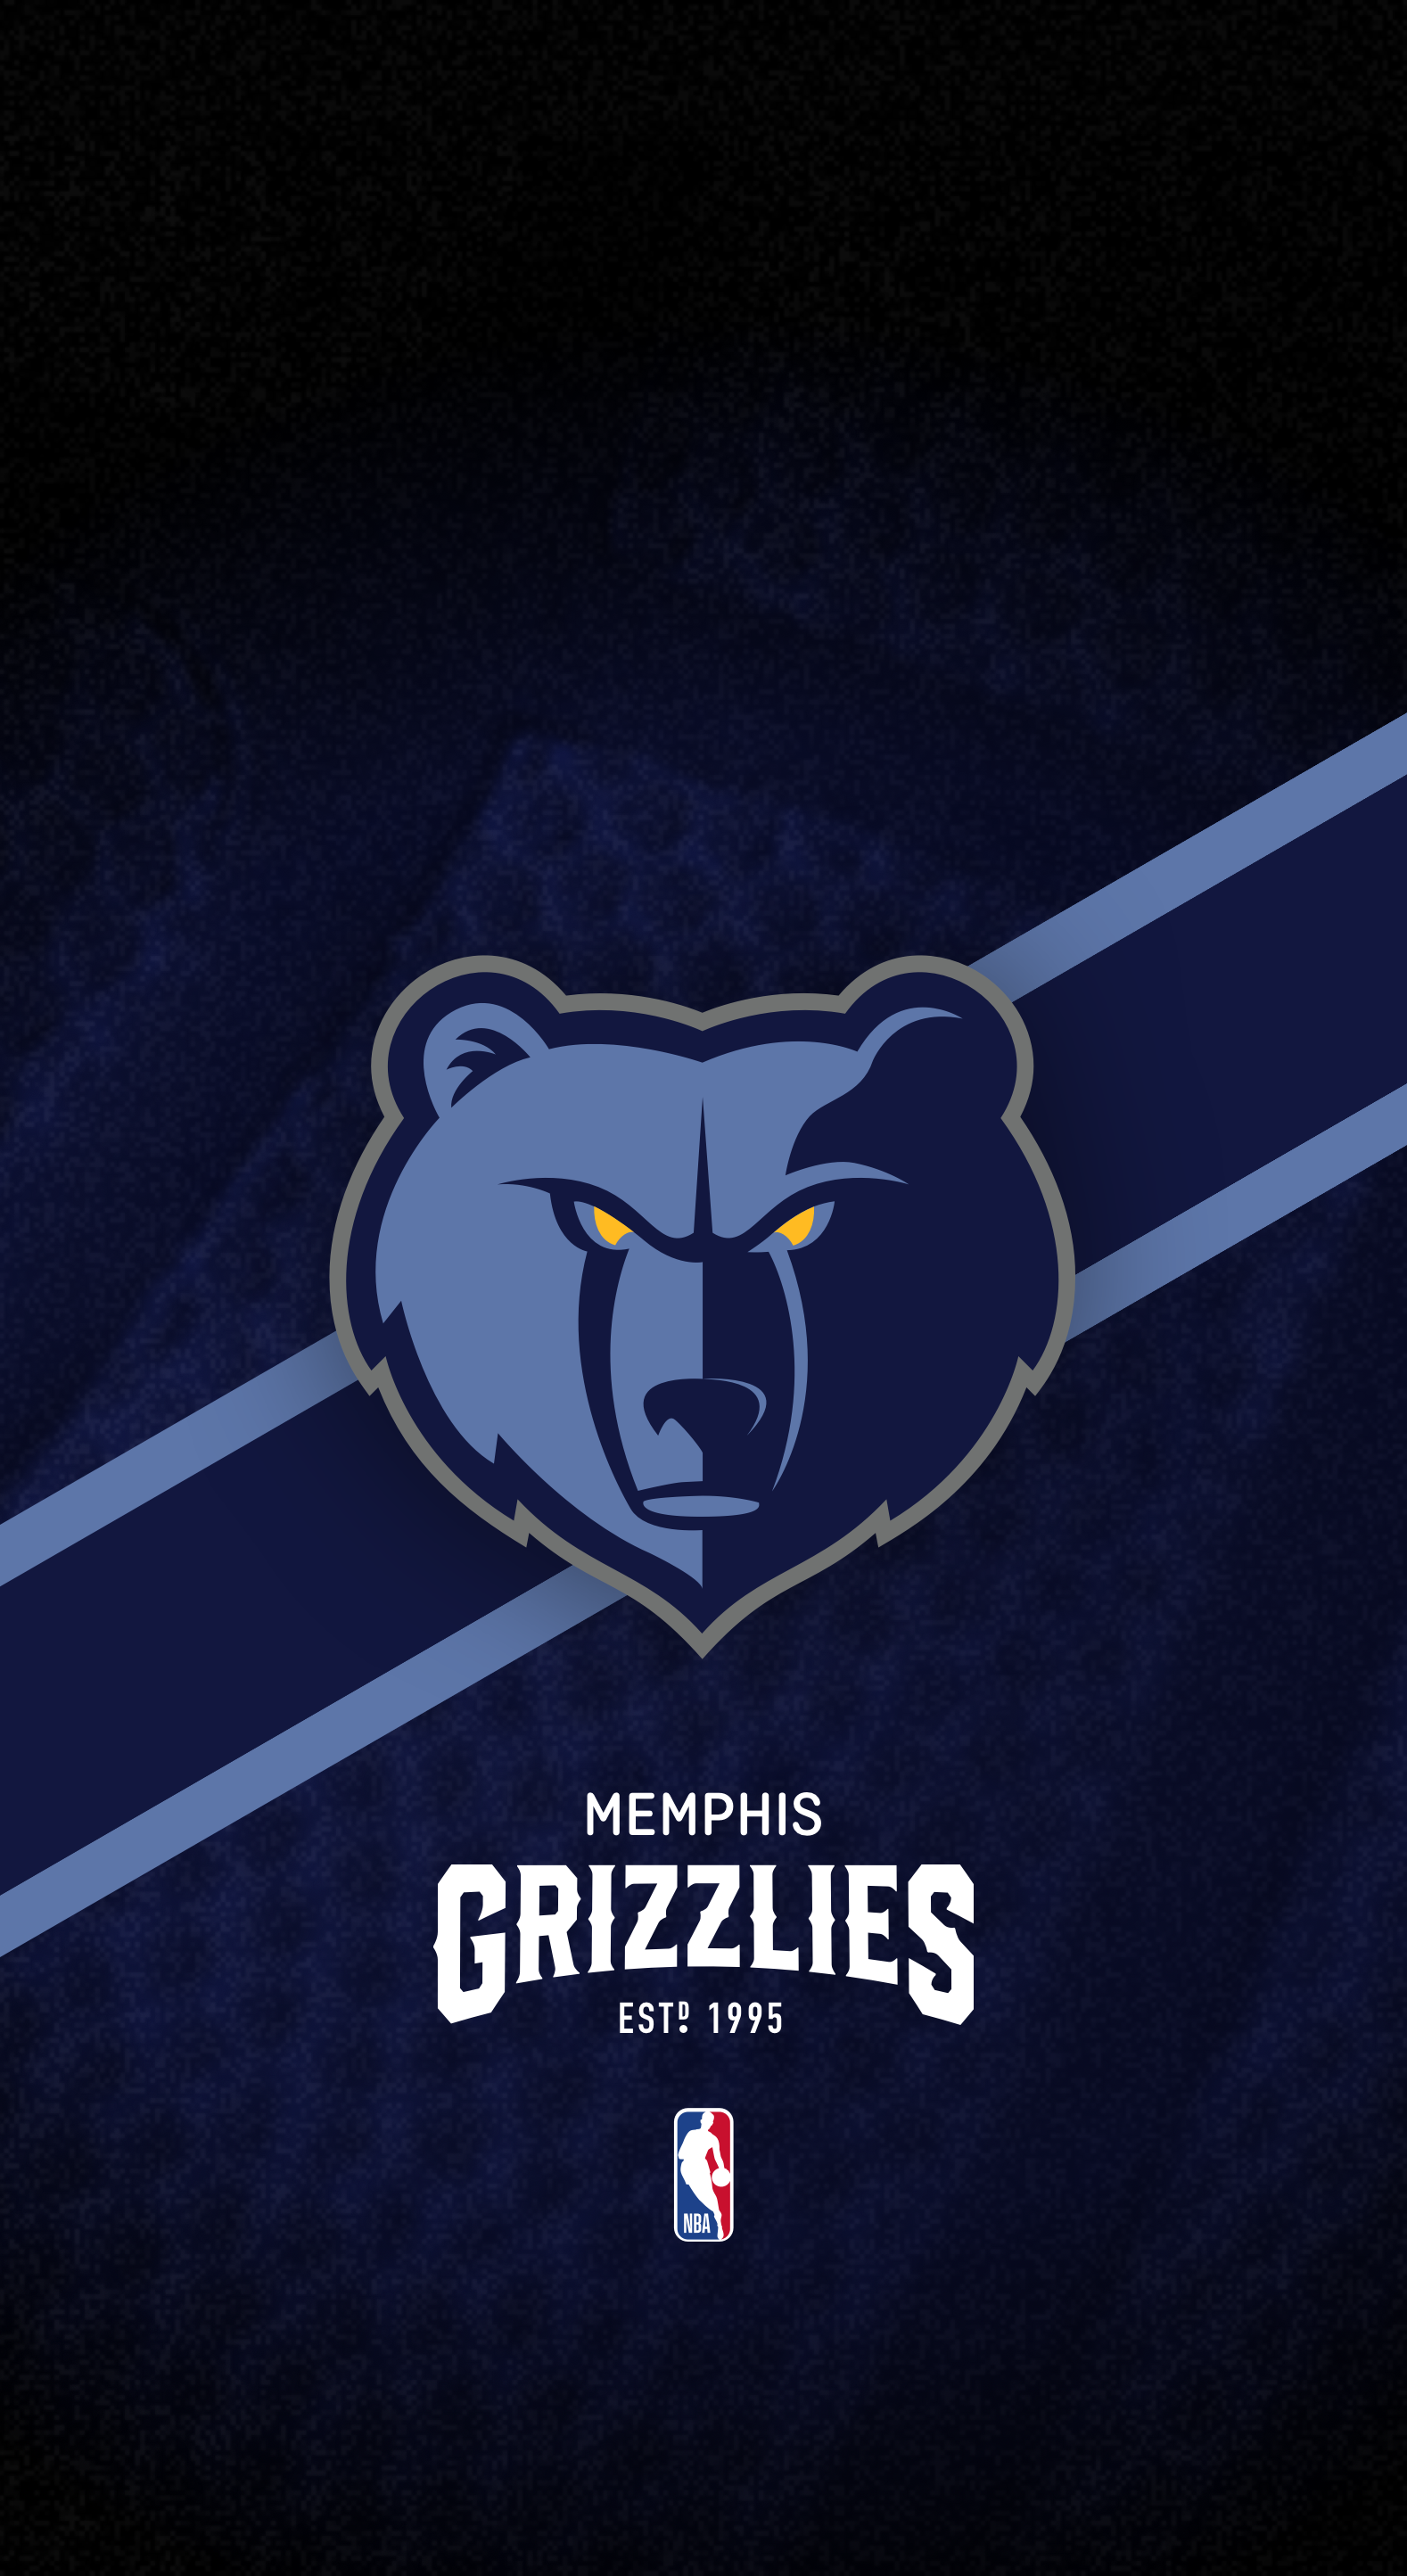 All Sizes. Memphis Grizzlies (NBA) IPhone X XS 11 Android Lock Screen Wallpaper Sharing!